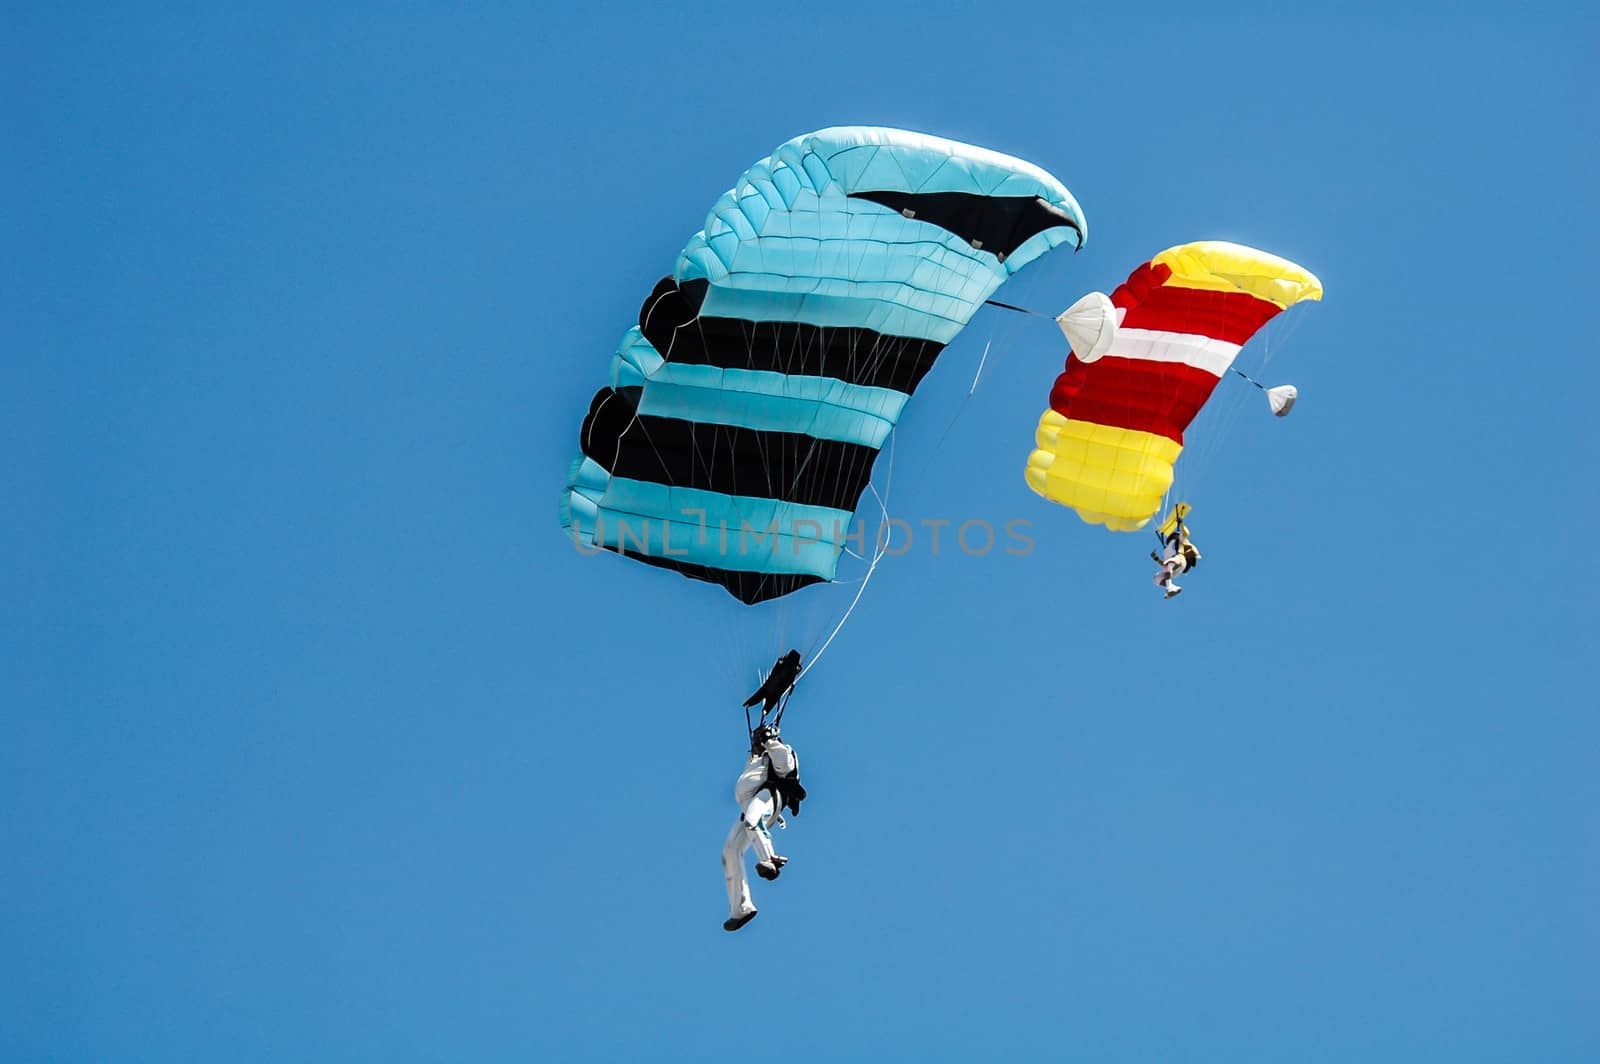 Parachuting in Clear Blue Sky by cestes001